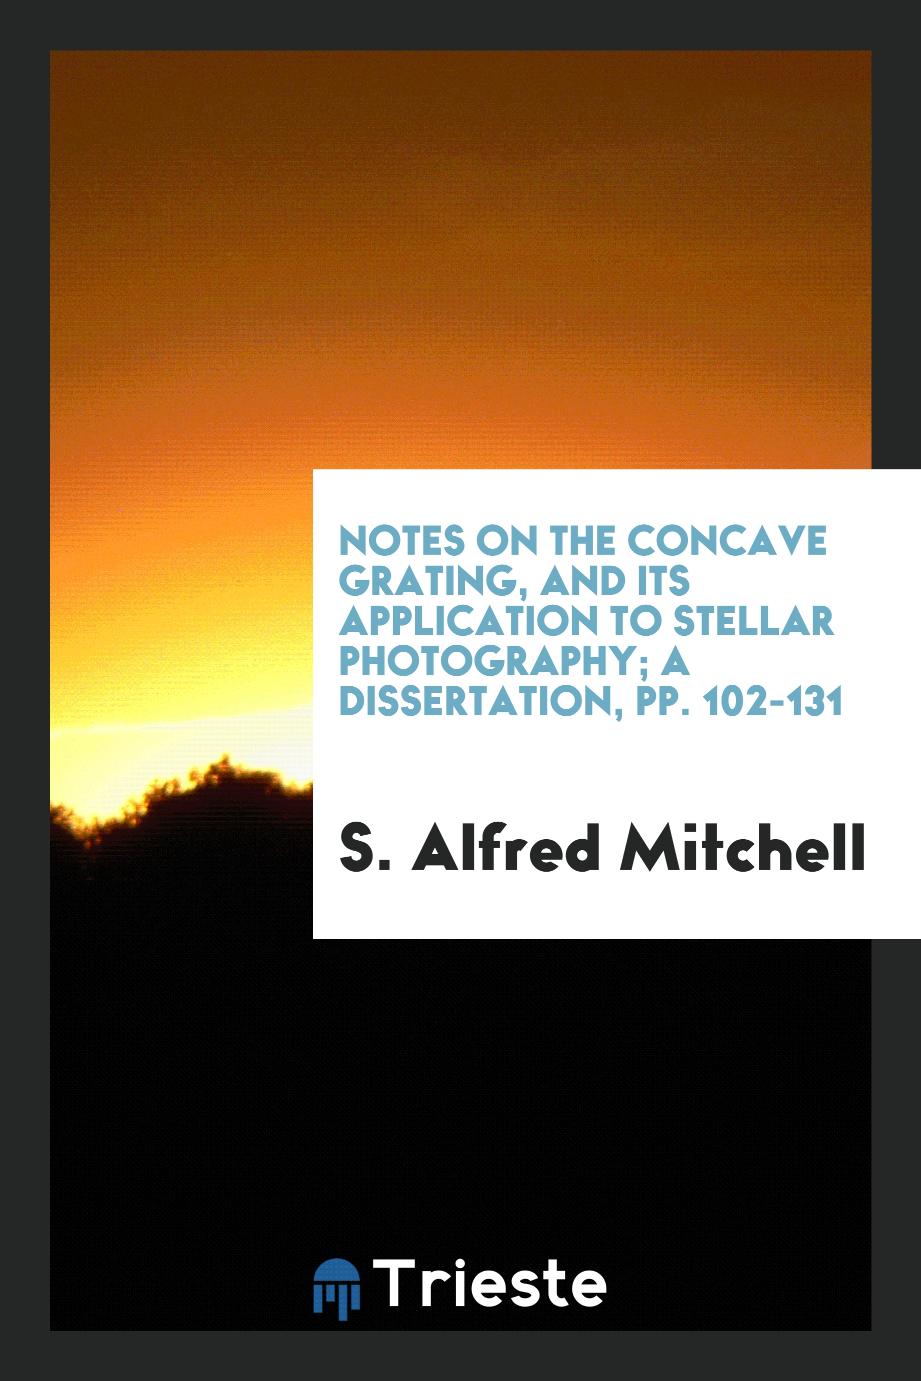 Notes on the Concave Grating, And Its Application to Stellar Photography; a dissertation, pp. 102-131